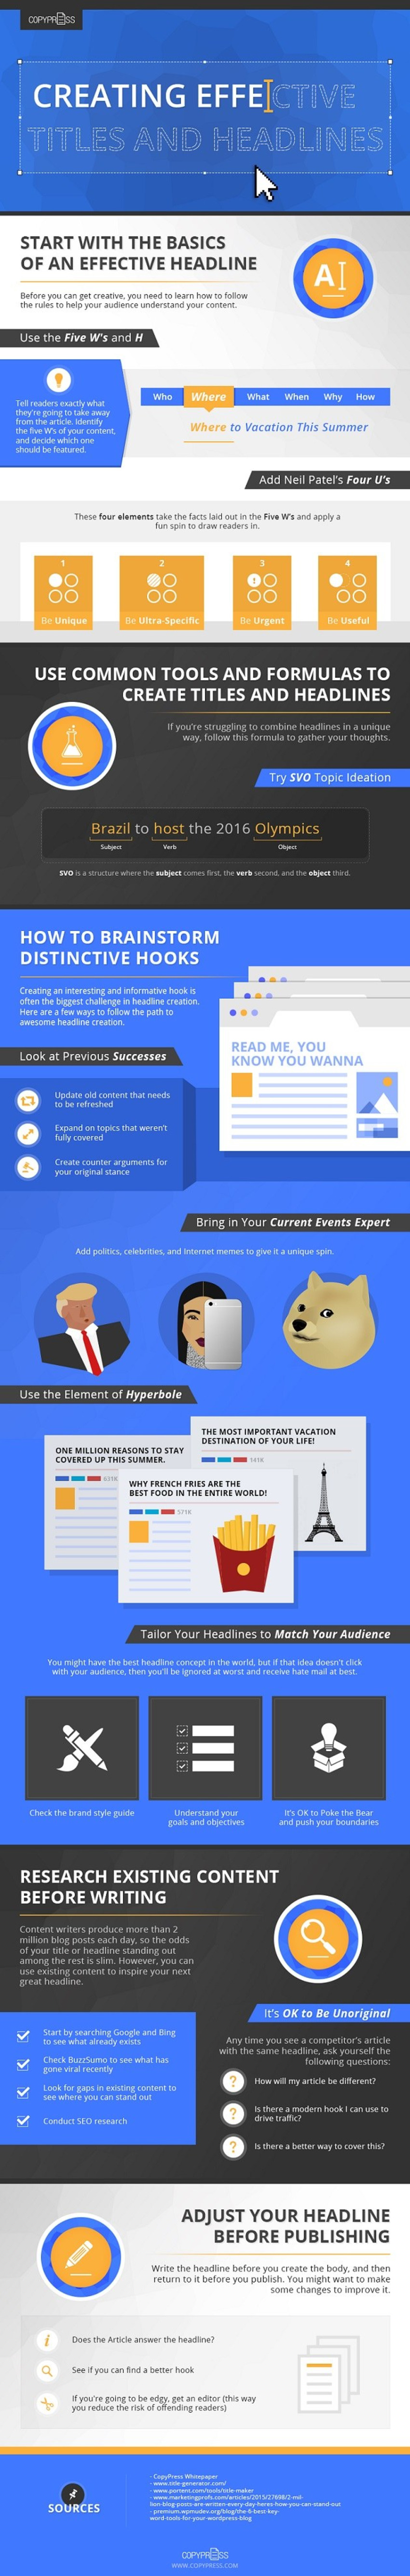 How to Create Eye-Catching and Effective Headlines [Infographic] - Profs | The MarTech Digest | Scoop.it